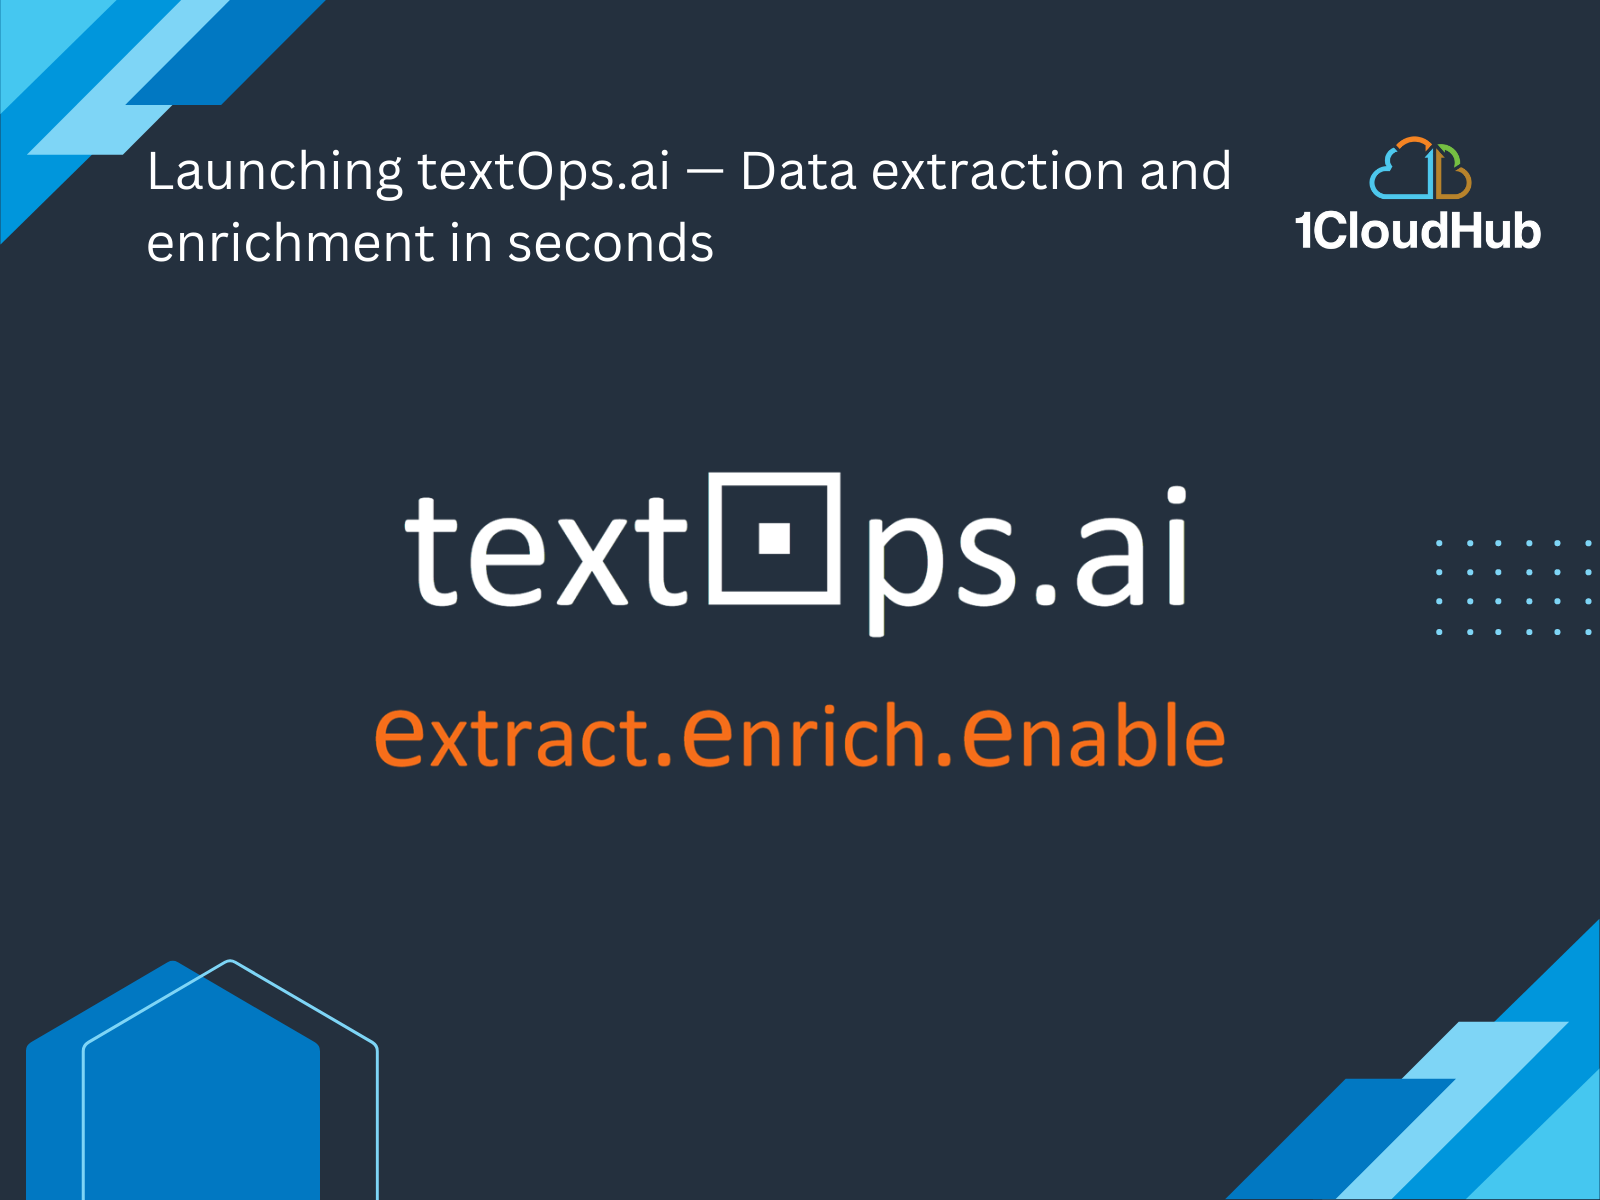 Launching textOps.ai — Data extraction and enrichment in seconds